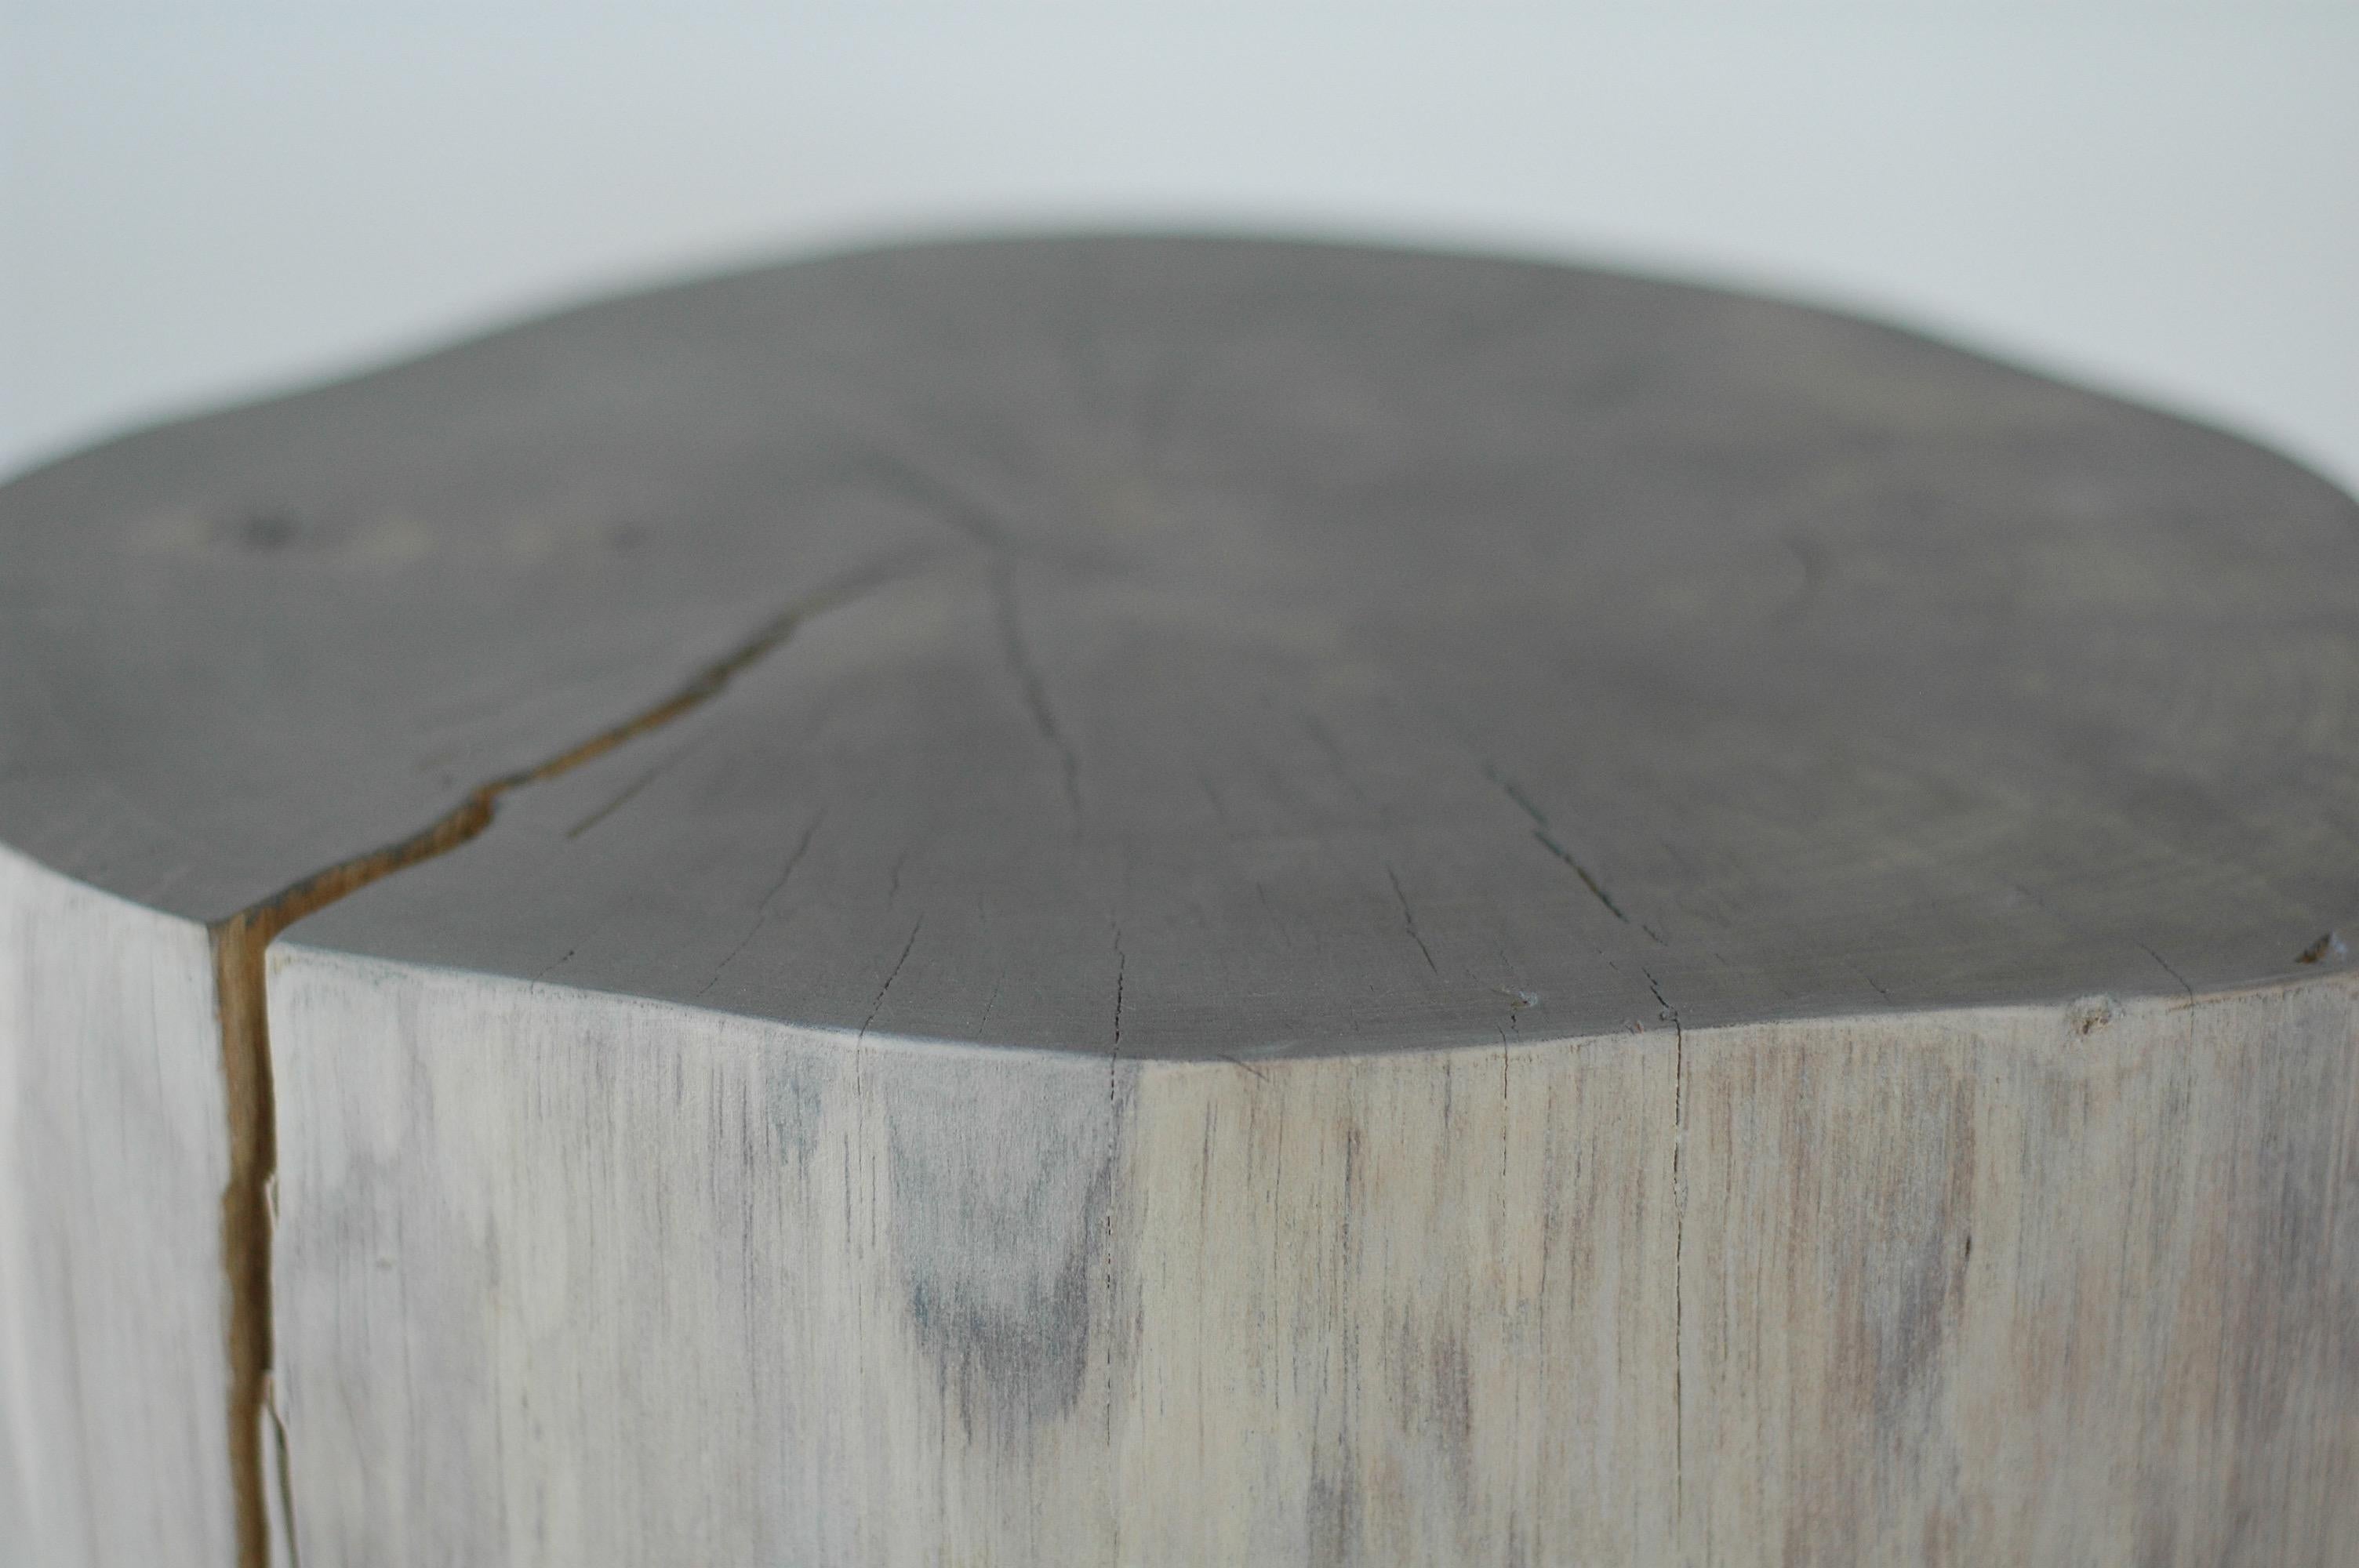 Contemporary Live Edge Round Side Table - Midcentury Modern Furniture - Sputnik Table